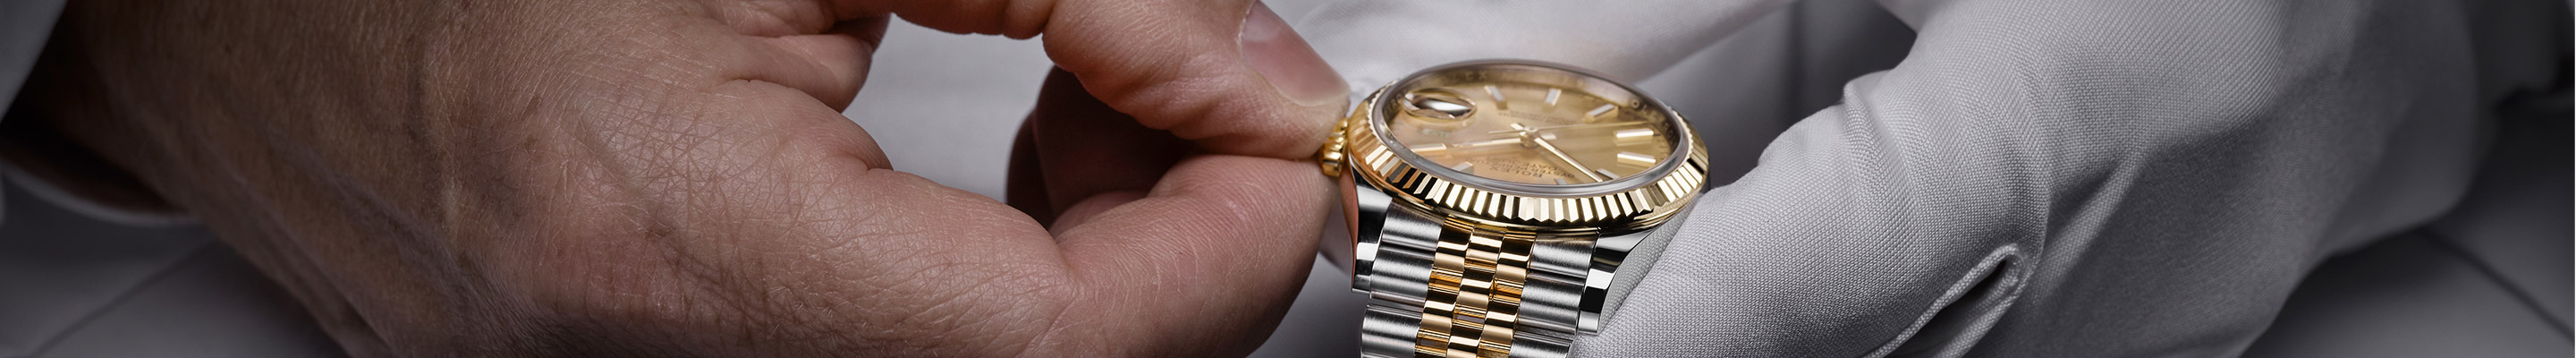 Rolex Watch Servicing and Repair at Korman Fine Jewelry